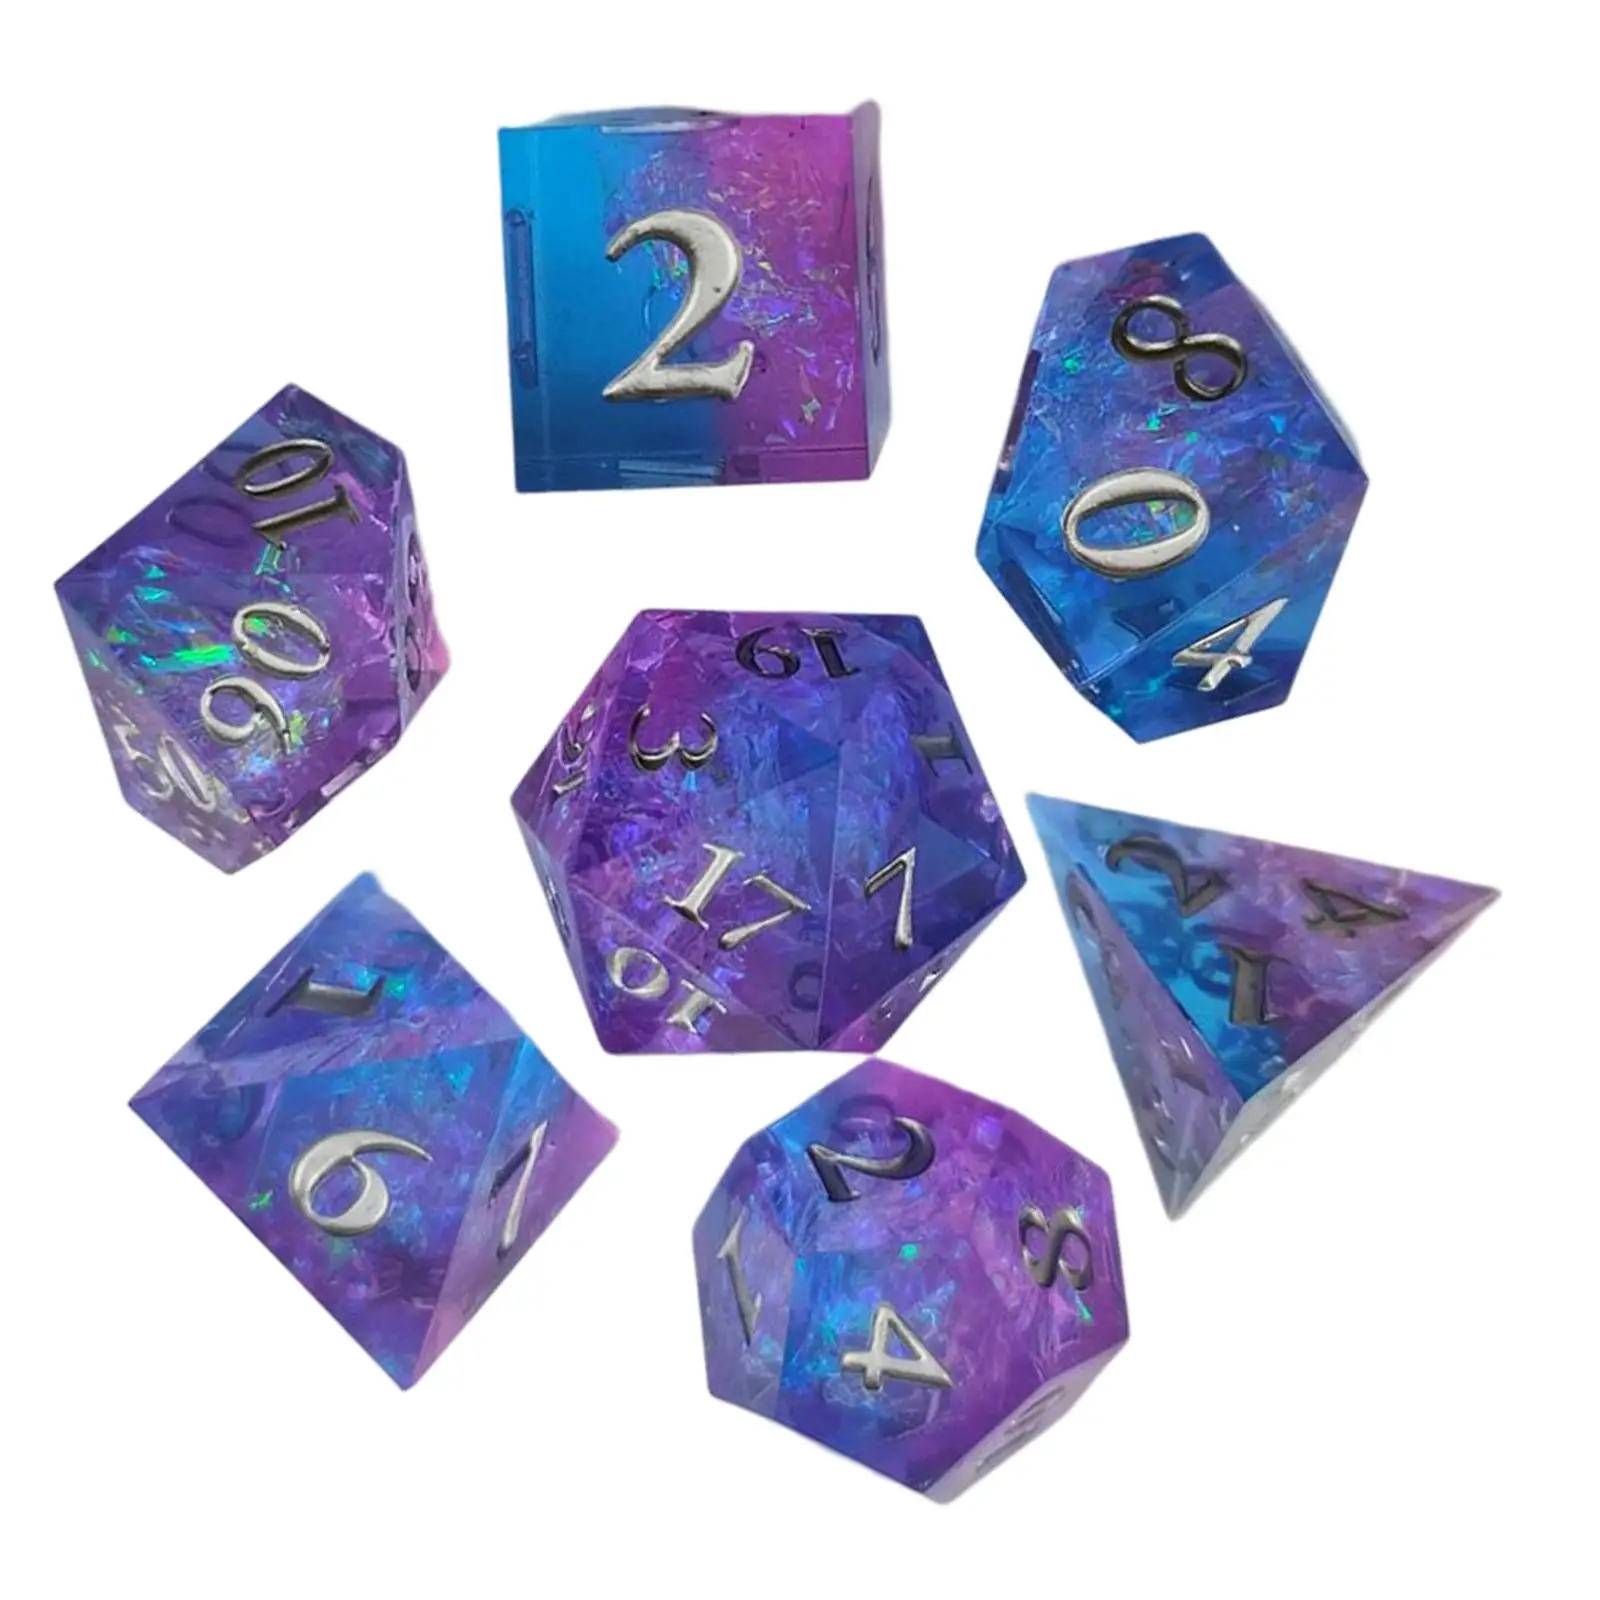 7x Polyhedral dices Sets Assorted Multi Sided RPG Dices Game Dices for Table Game Role Play Party Favors Entertainment